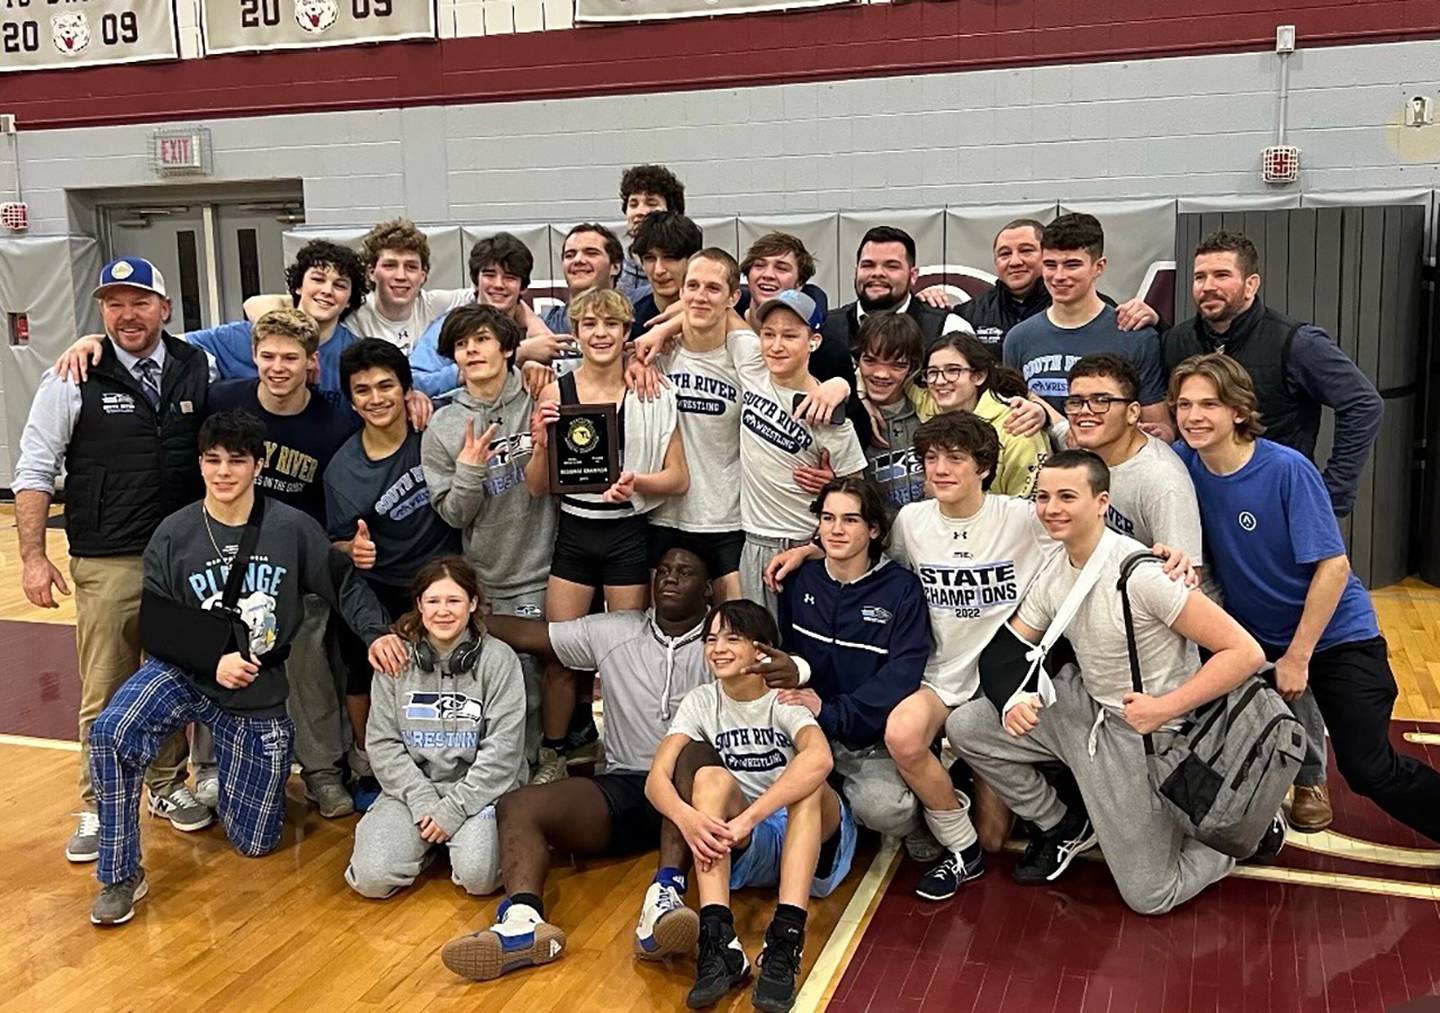 South River avenged an earlier loss to Anne Arundel County rival Broadneck by knocking off the top-seeded Bruins, 38-30, the 4A East Region finals.